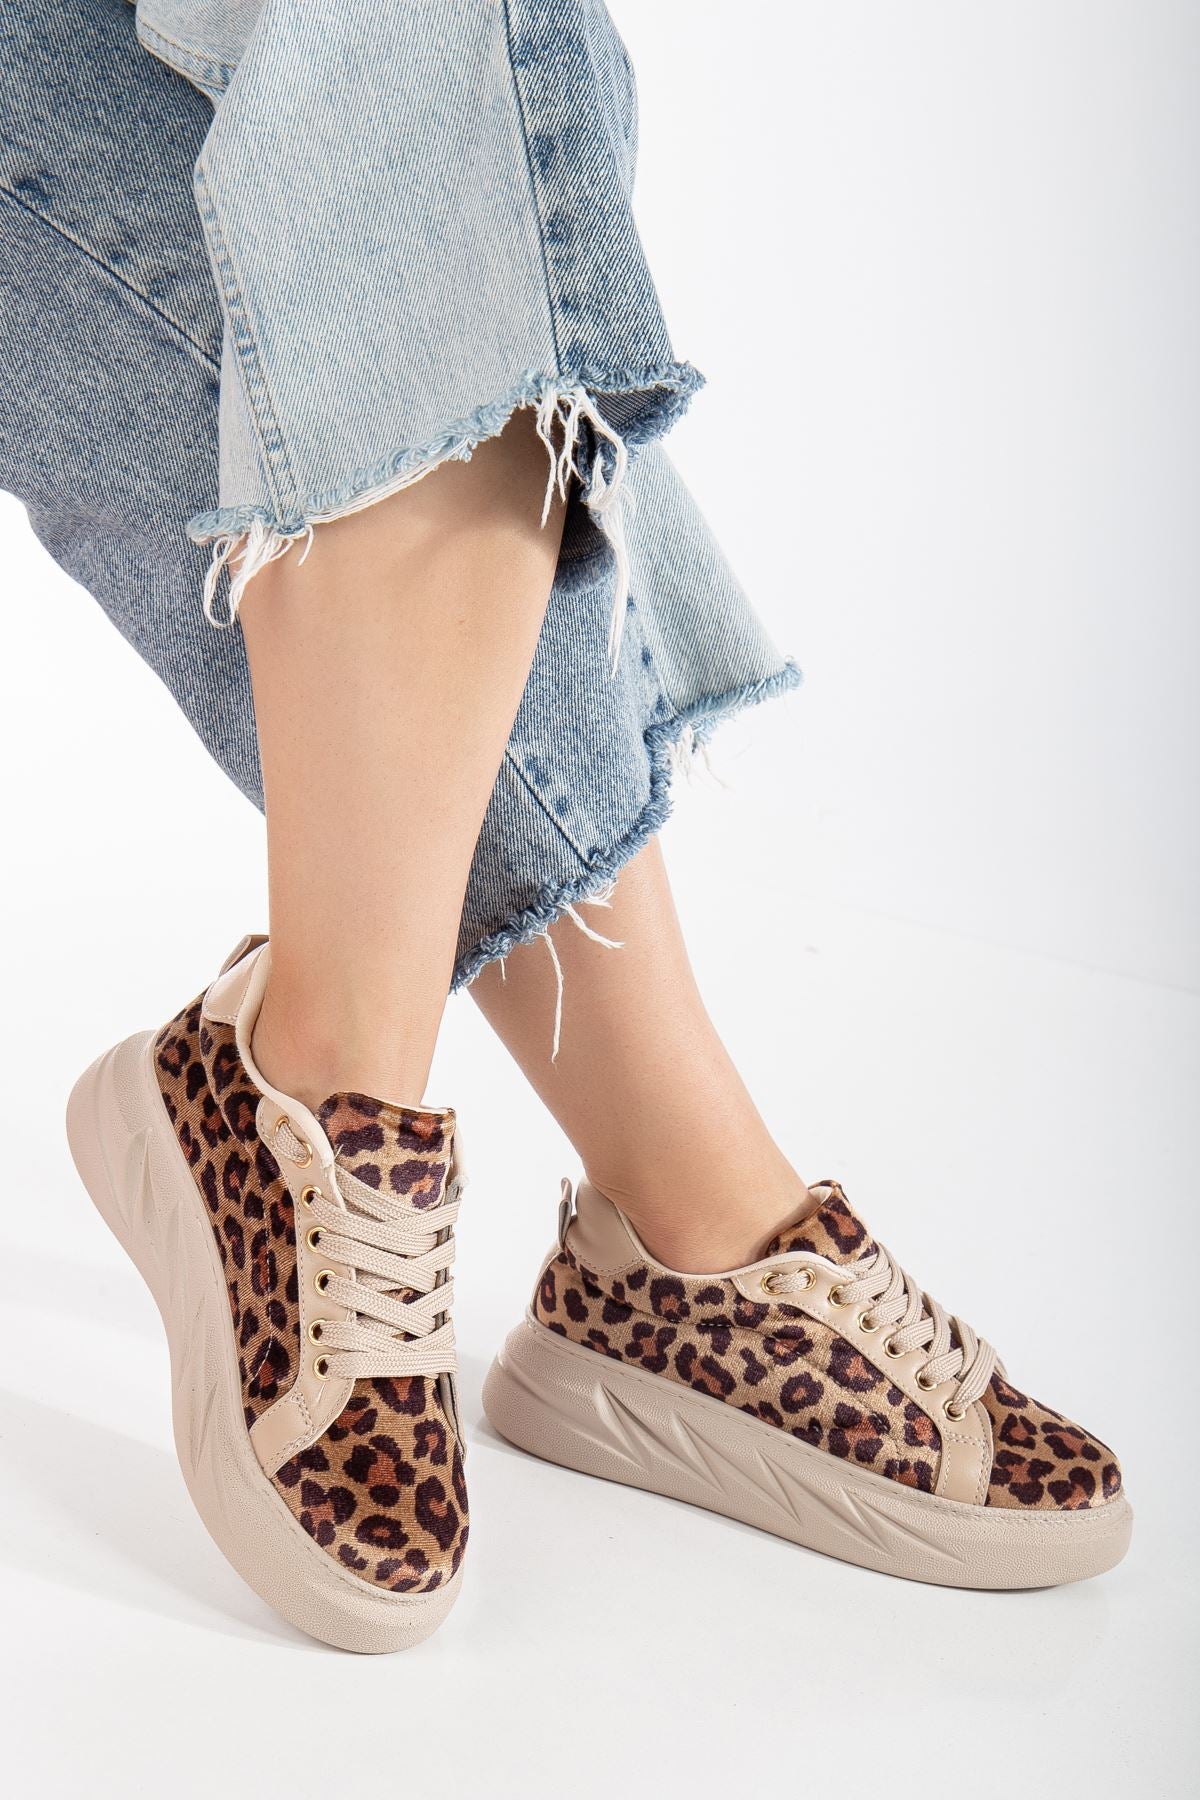 Women's Leopard Velvet Thick Soled Sneakers with Gold Detail - STREETMODE ™